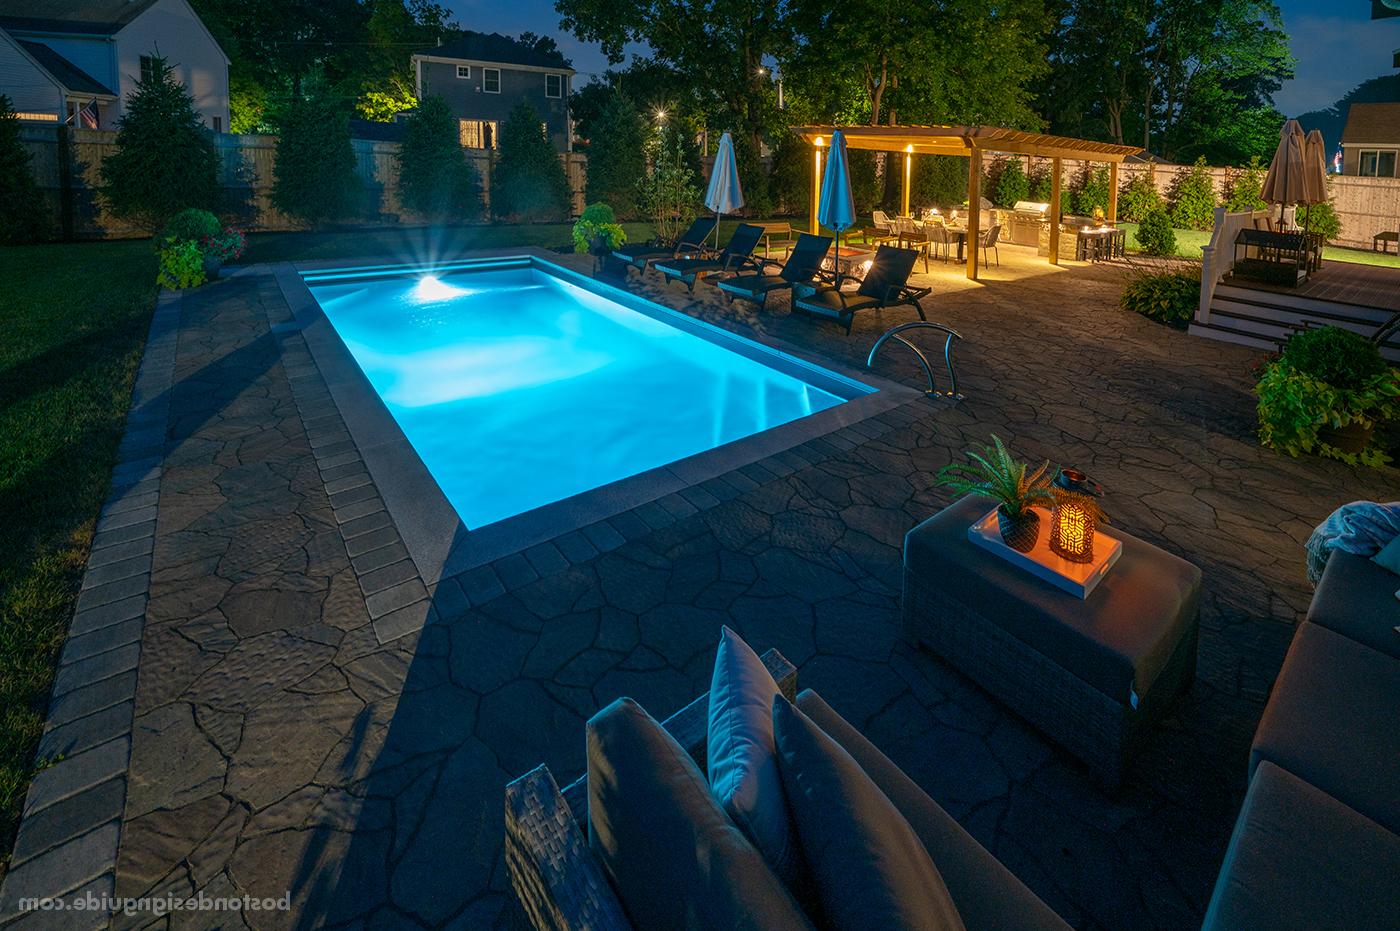 Residential pool terrace design at night by Land Design Associates